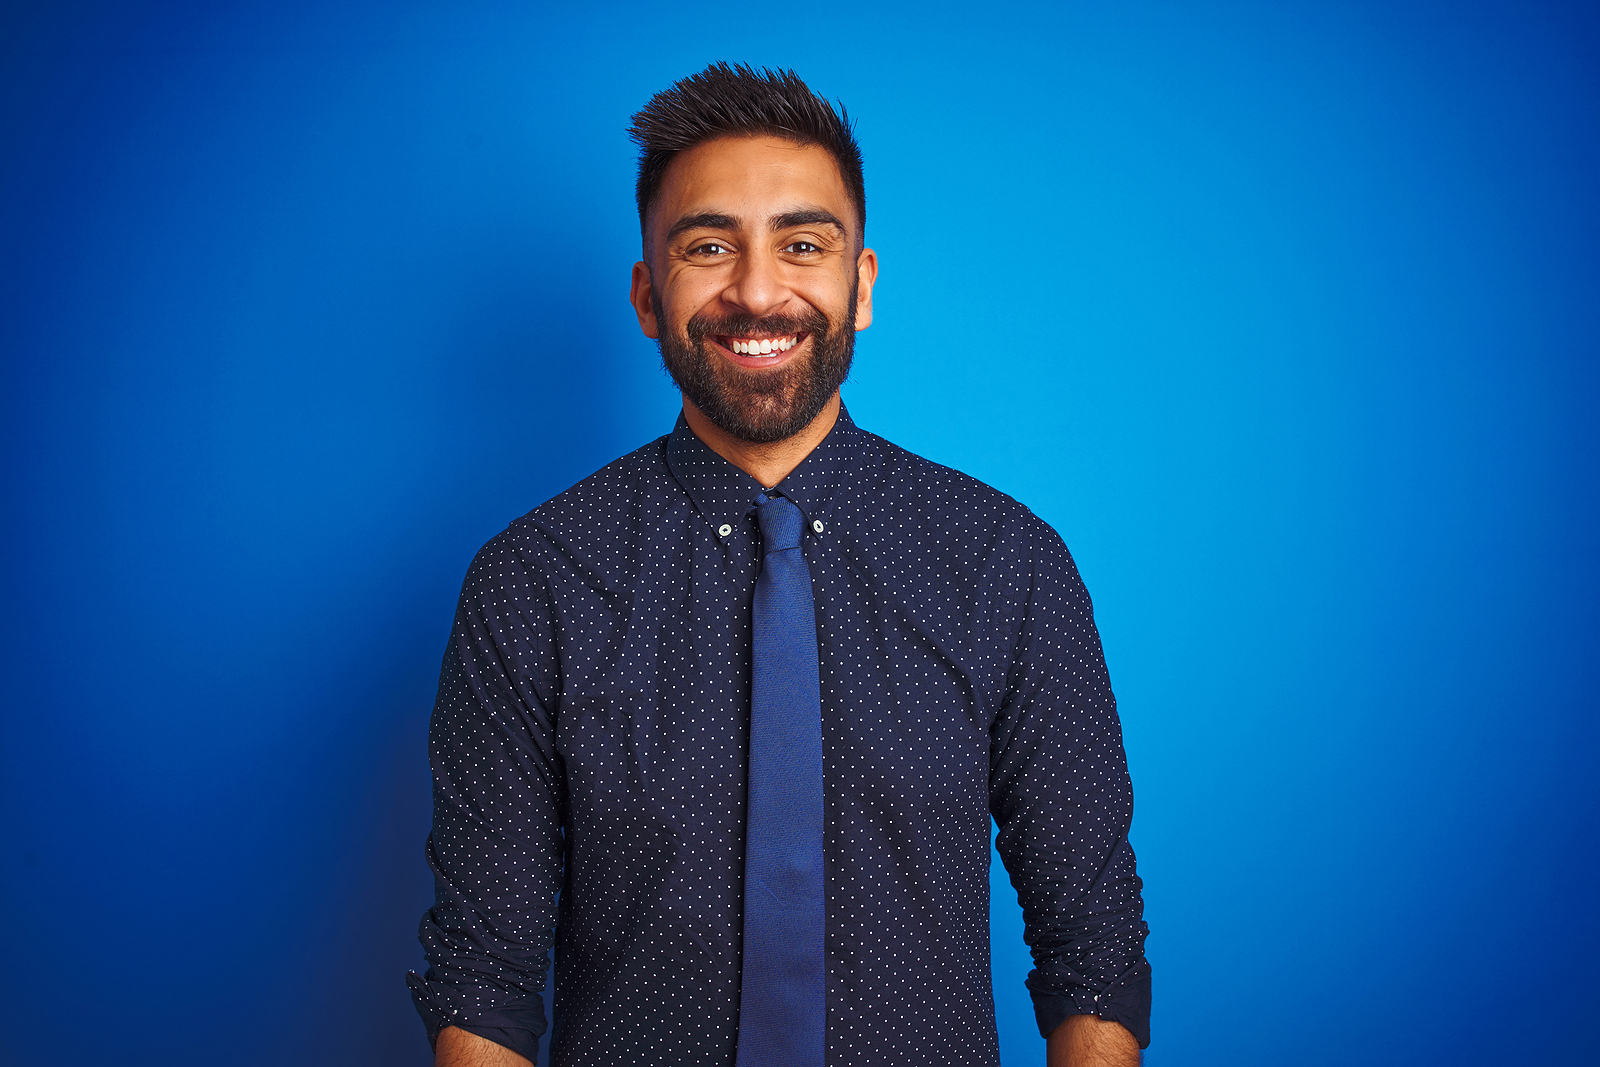 An attractive latin guy wearing a button up and tie smiles for the camera against a simple background.